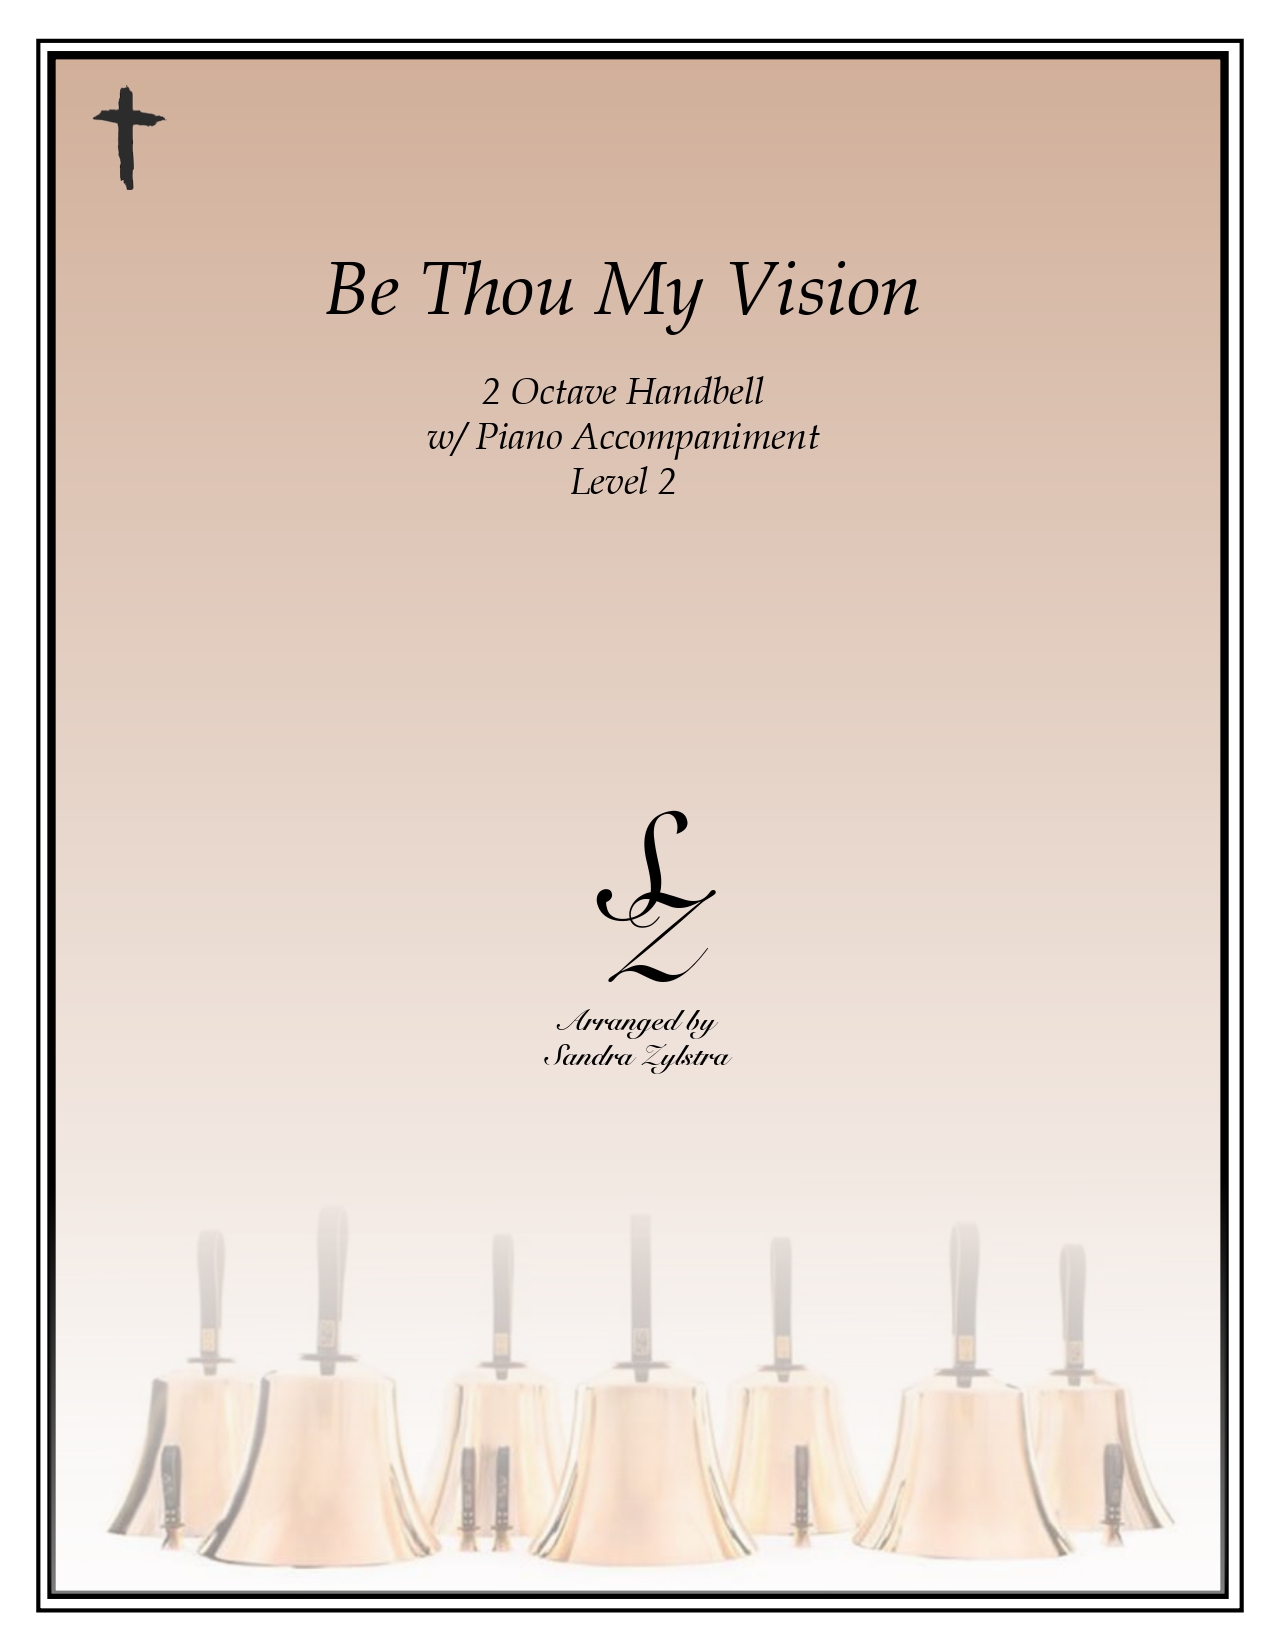 Be Thou My Vision 2 octave handbell part cover page 00011